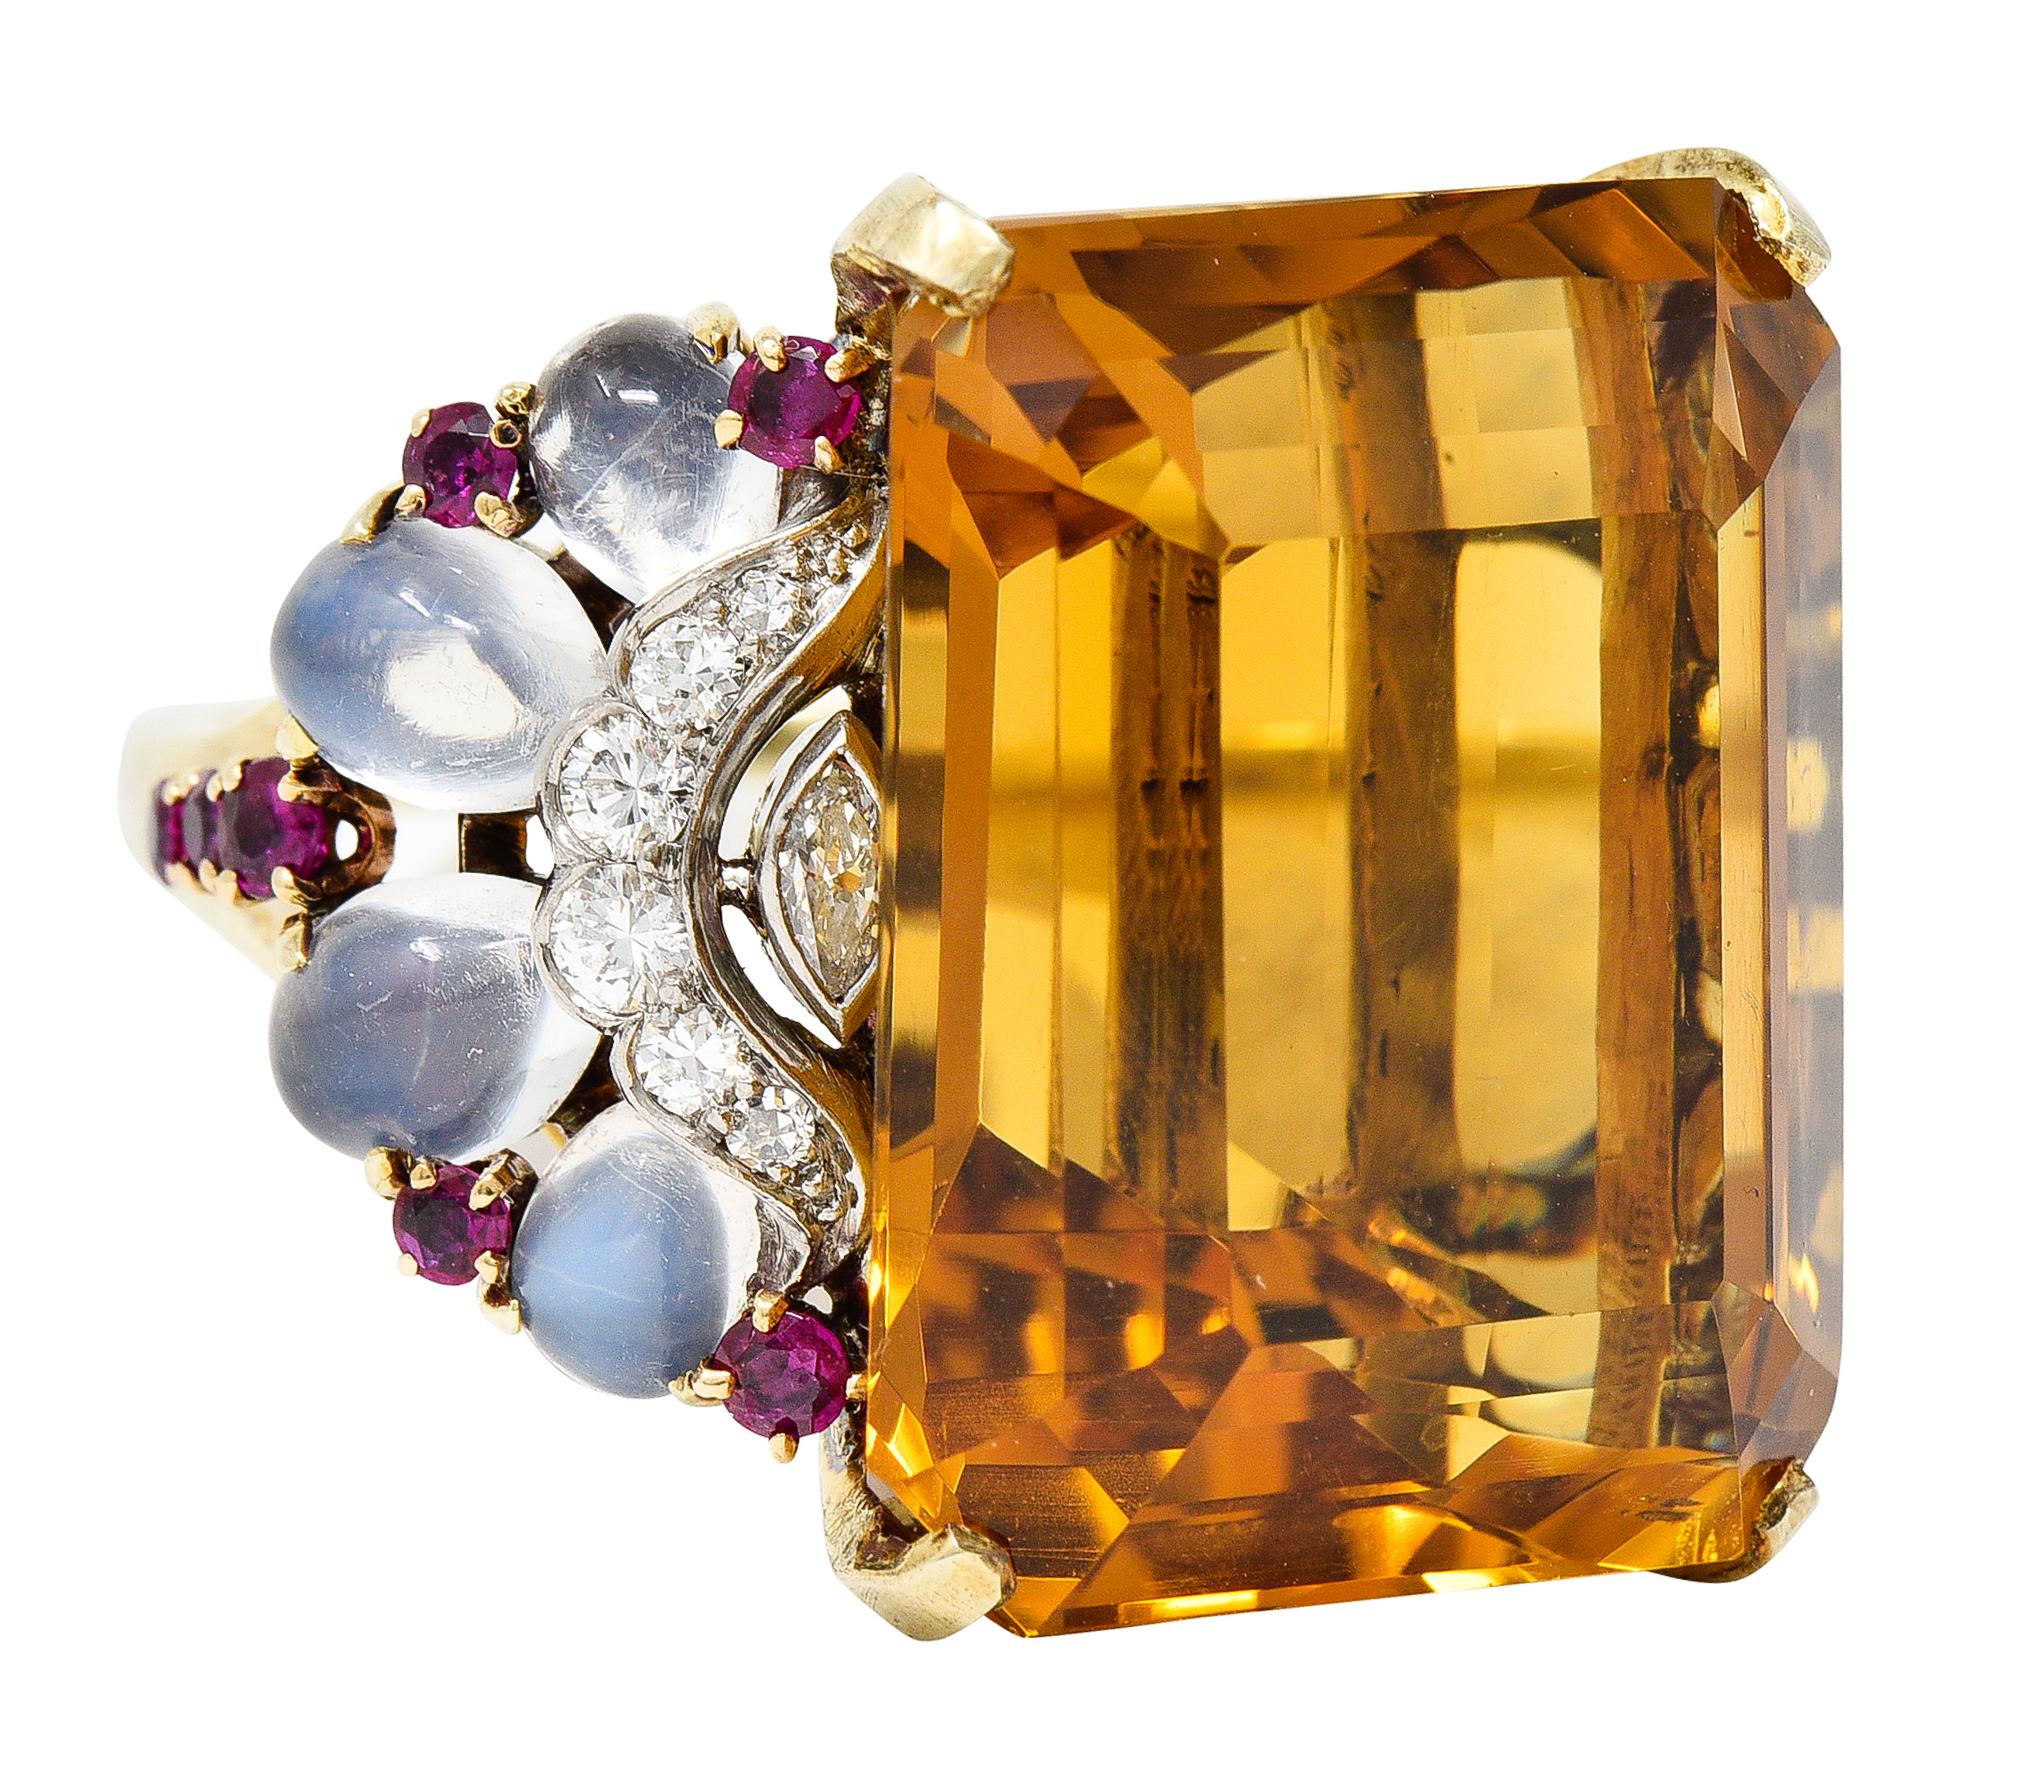 Centering an emerald cut citrine weighing approximately 38.77 carats total - transparent brownish-orange in color. Prong set in basket and flanked by transitional and marquise cut diamonds - bezel and bead set in platinum. Weighing approximately